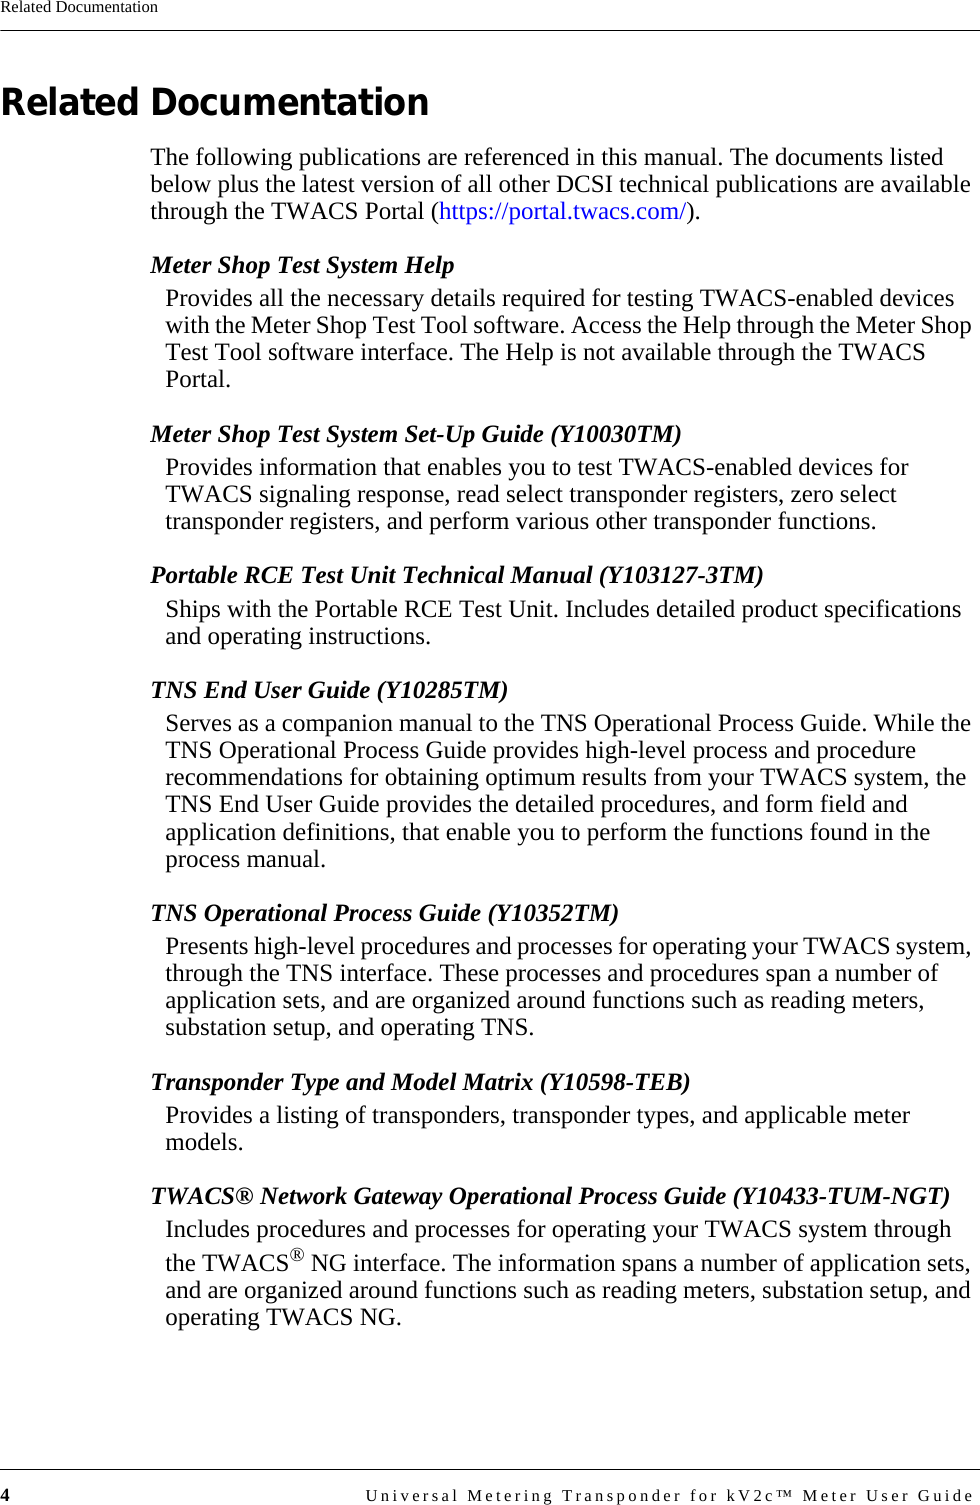 4Universal Metering Transponder for kV2c™ Meter User GuideRelated DocumentationRelated DocumentationThe following publications are referenced in this manual. The documents listed below plus the latest version of all other DCSI technical publications are available through the TWACS Portal (https://portal.twacs.com/).Meter Shop Test System HelpProvides all the necessary details required for testing TWACS-enabled devices with the Meter Shop Test Tool software. Access the Help through the Meter Shop Test Tool software interface. The Help is not available through the TWACS Portal.Meter Shop Test System Set-Up Guide (Y10030TM)Provides information that enables you to test TWACS-enabled devices for TWACS signaling response, read select transponder registers, zero select transponder registers, and perform various other transponder functions.Portable RCE Test Unit Technical Manual (Y103127-3TM)Ships with the Portable RCE Test Unit. Includes detailed product specifications and operating instructions.TNS End User Guide (Y10285TM)Serves as a companion manual to the TNS Operational Process Guide. While the TNS Operational Process Guide provides high-level process and procedure recommendations for obtaining optimum results from your TWACS system, the TNS End User Guide provides the detailed procedures, and form field and application definitions, that enable you to perform the functions found in the process manual.TNS Operational Process Guide (Y10352TM)Presents high-level procedures and processes for operating your TWACS system, through the TNS interface. These processes and procedures span a number of application sets, and are organized around functions such as reading meters, substation setup, and operating TNS.Transponder Type and Model Matrix (Y10598-TEB)Provides a listing of transponders, transponder types, and applicable meter models.TWACS® Network Gateway Operational Process Guide (Y10433-TUM-NGT)Includes procedures and processes for operating your TWACS system through the TWACS® NG interface. The information spans a number of application sets, and are organized around functions such as reading meters, substation setup, and operating TWACS NG.